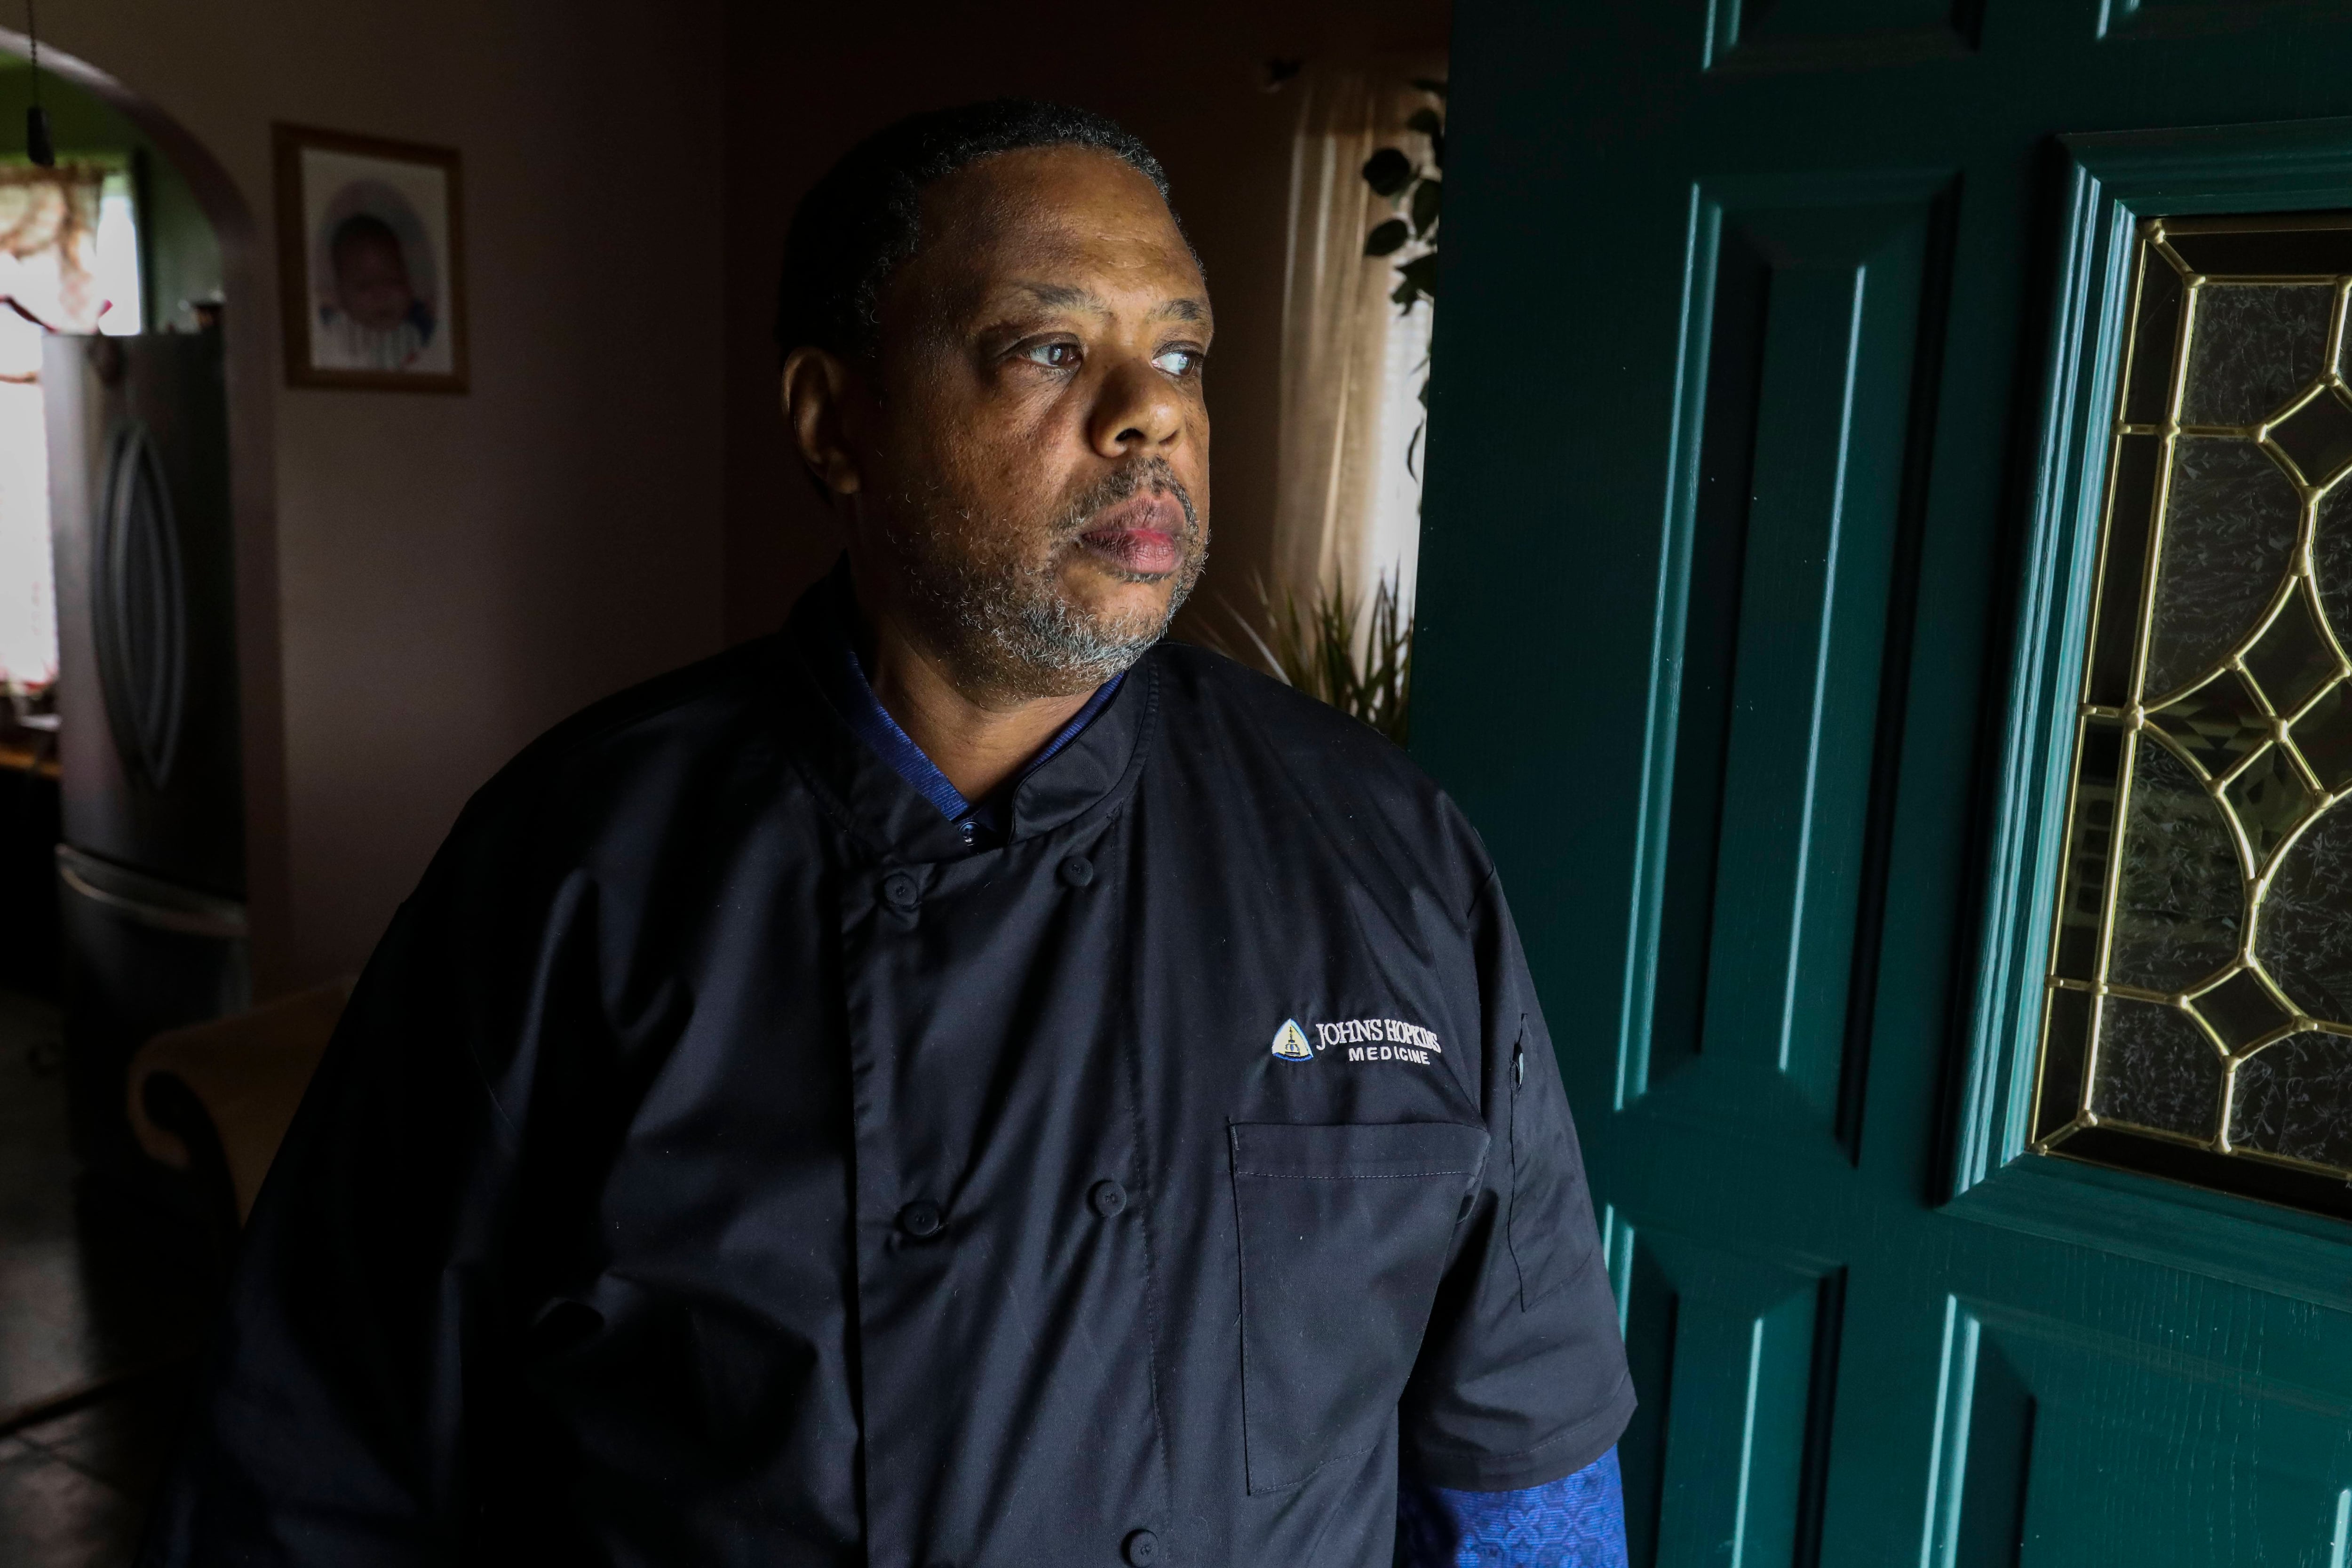 Kevin Blunt, Former Hopkins hospital kitchen worker, tried to report safety and sanitation problems. Hopkins didn't fix the problems and fired him instead.